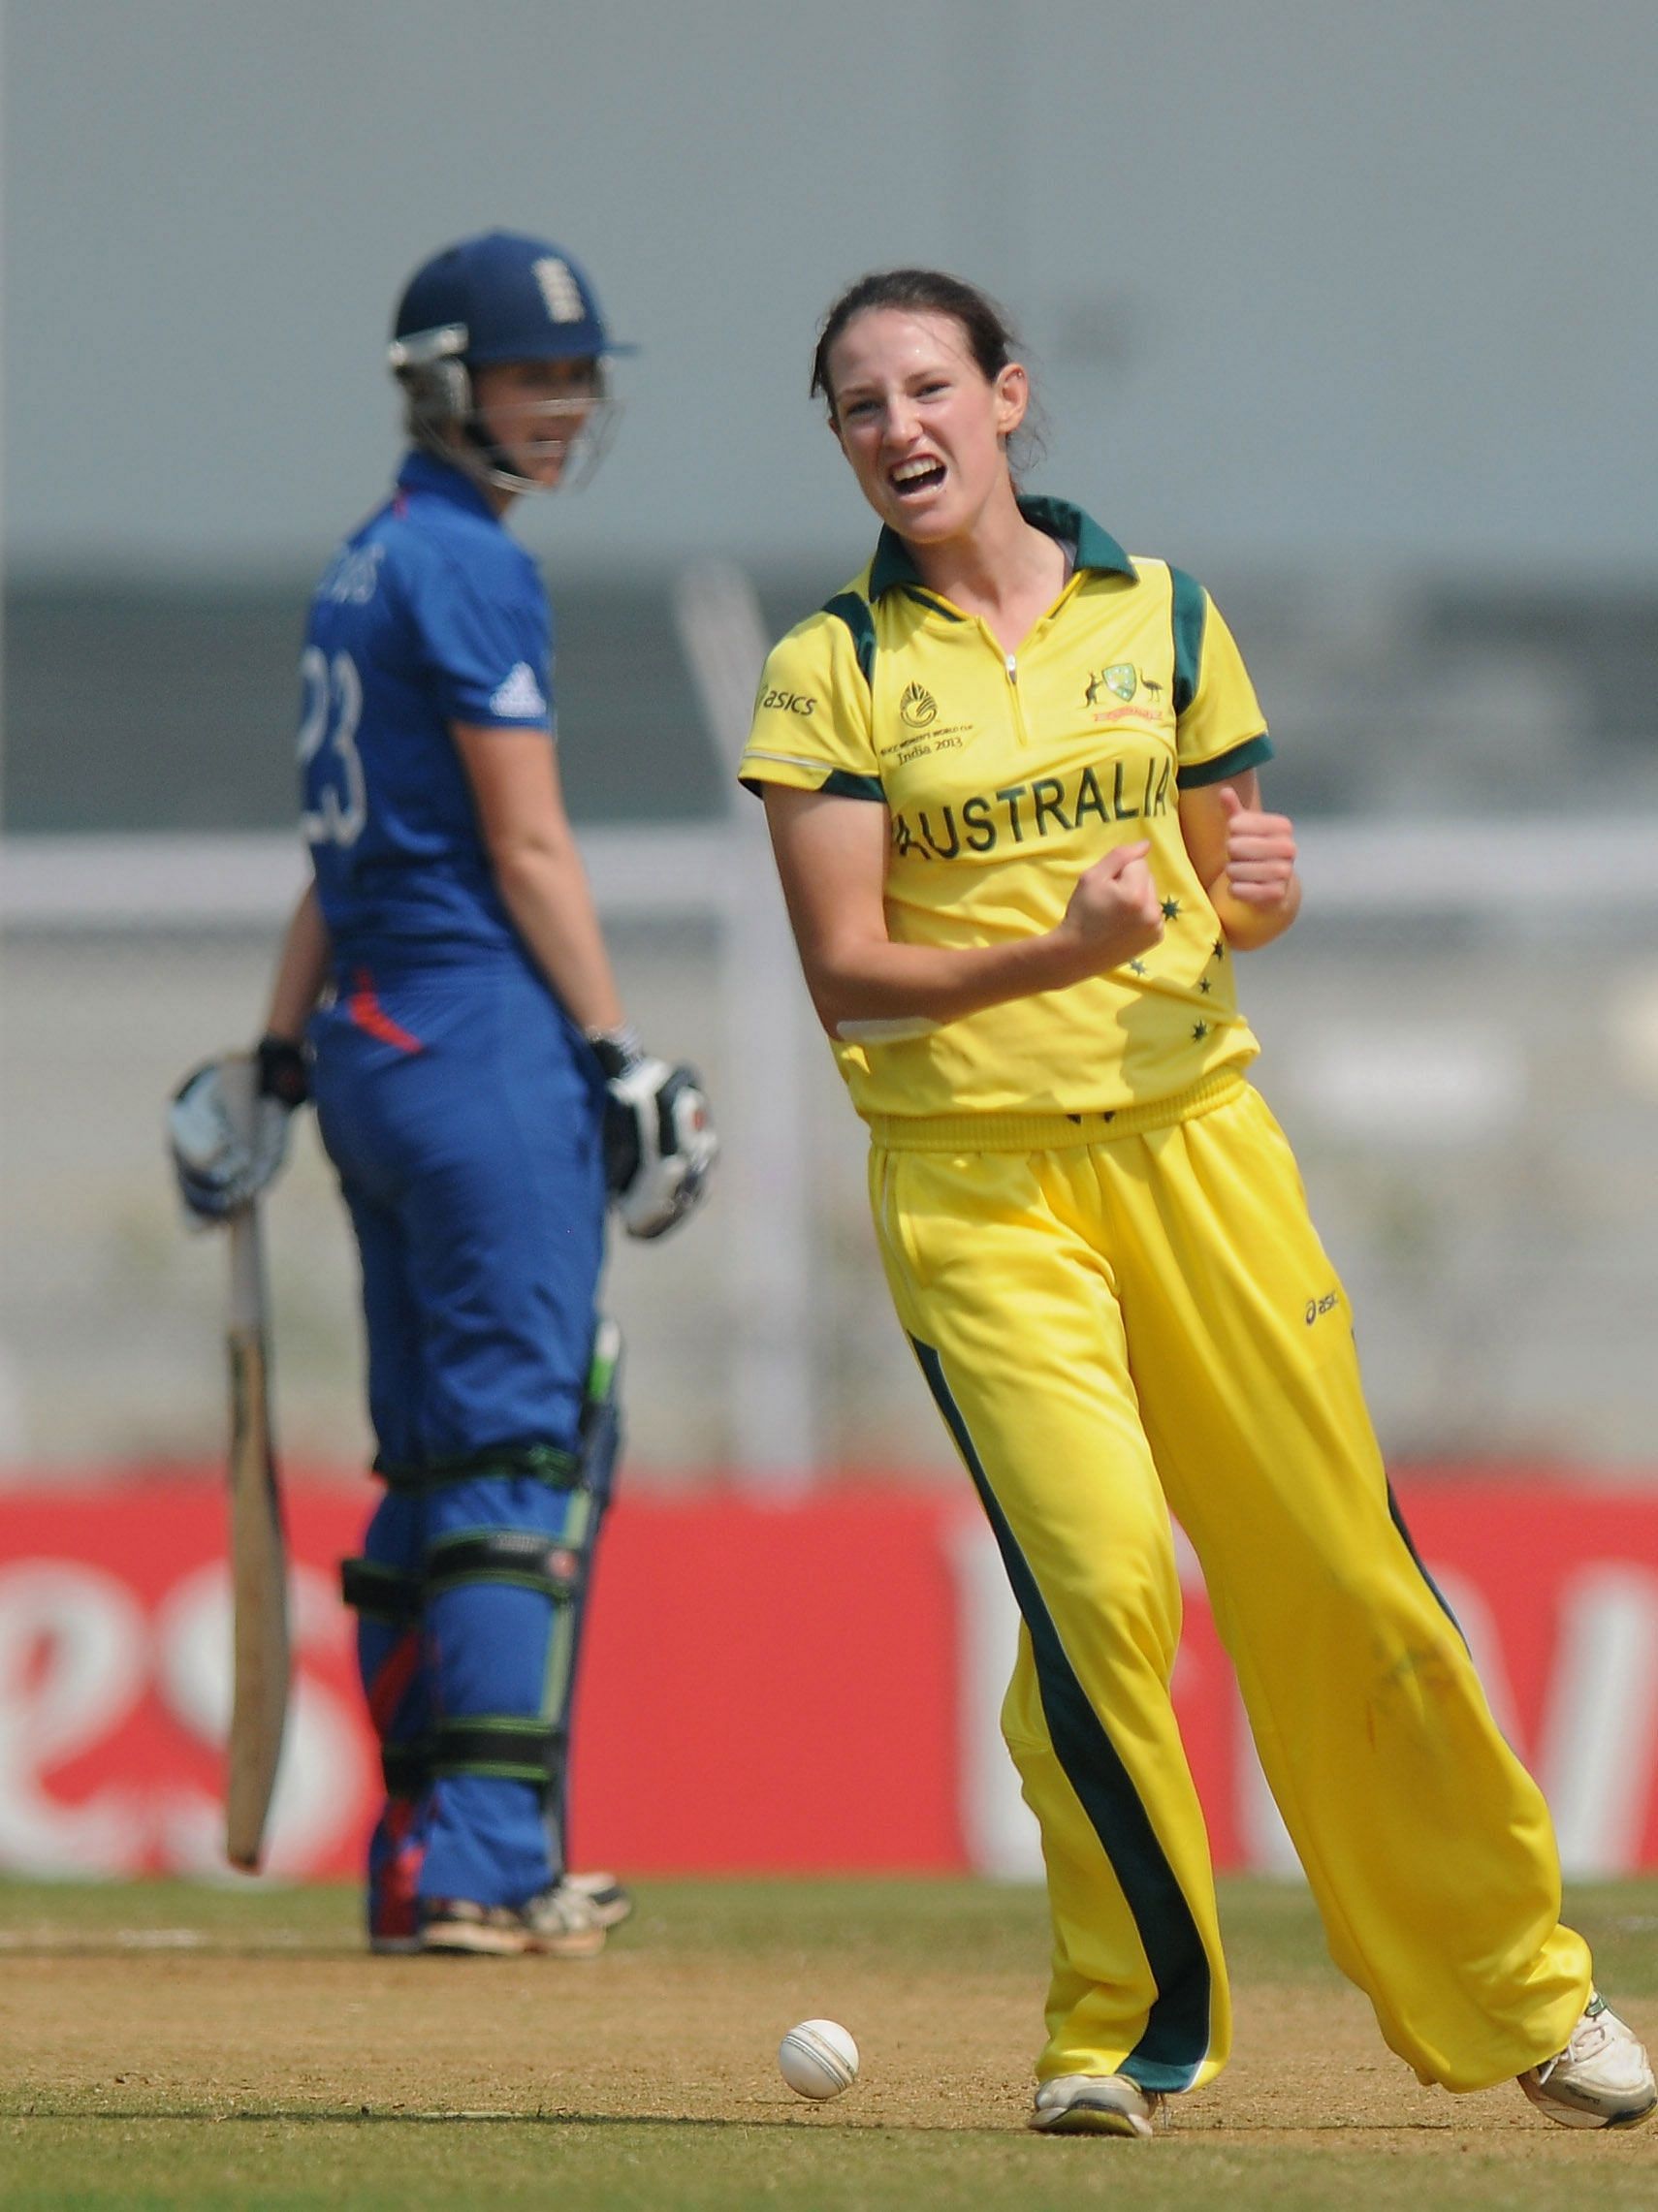 Meagan Schutt was the leading wicket-taker at the 2013 World Cup.